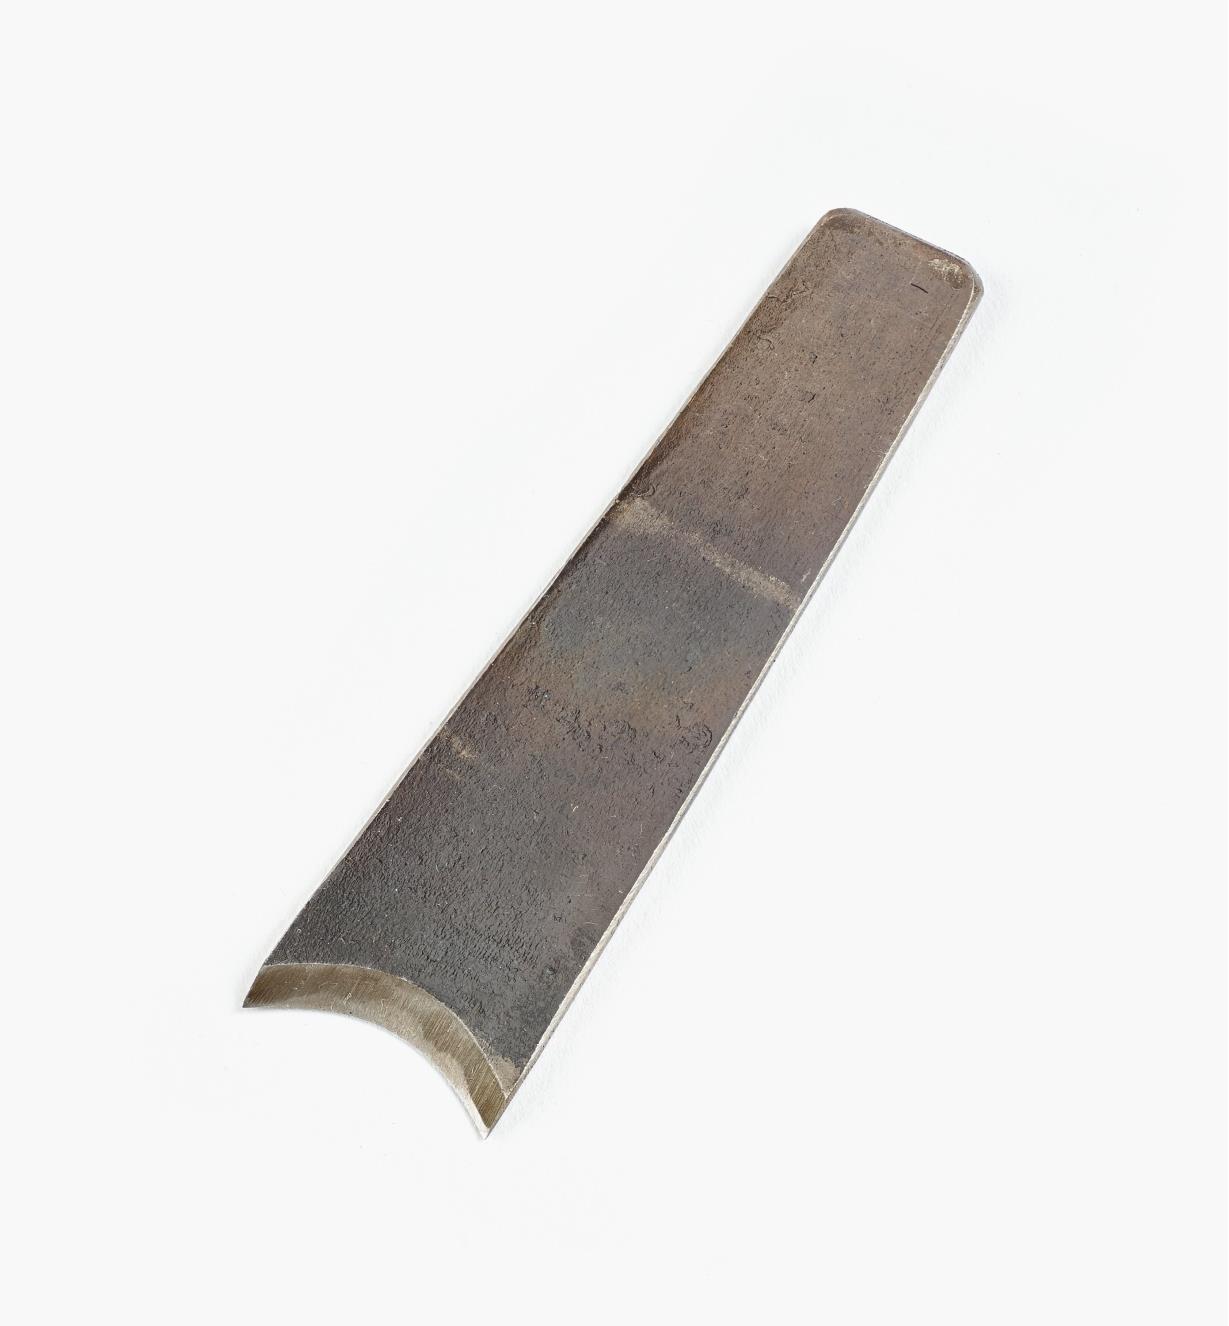 07P1624 - Replacement Blade for 25mm Hollow Plane